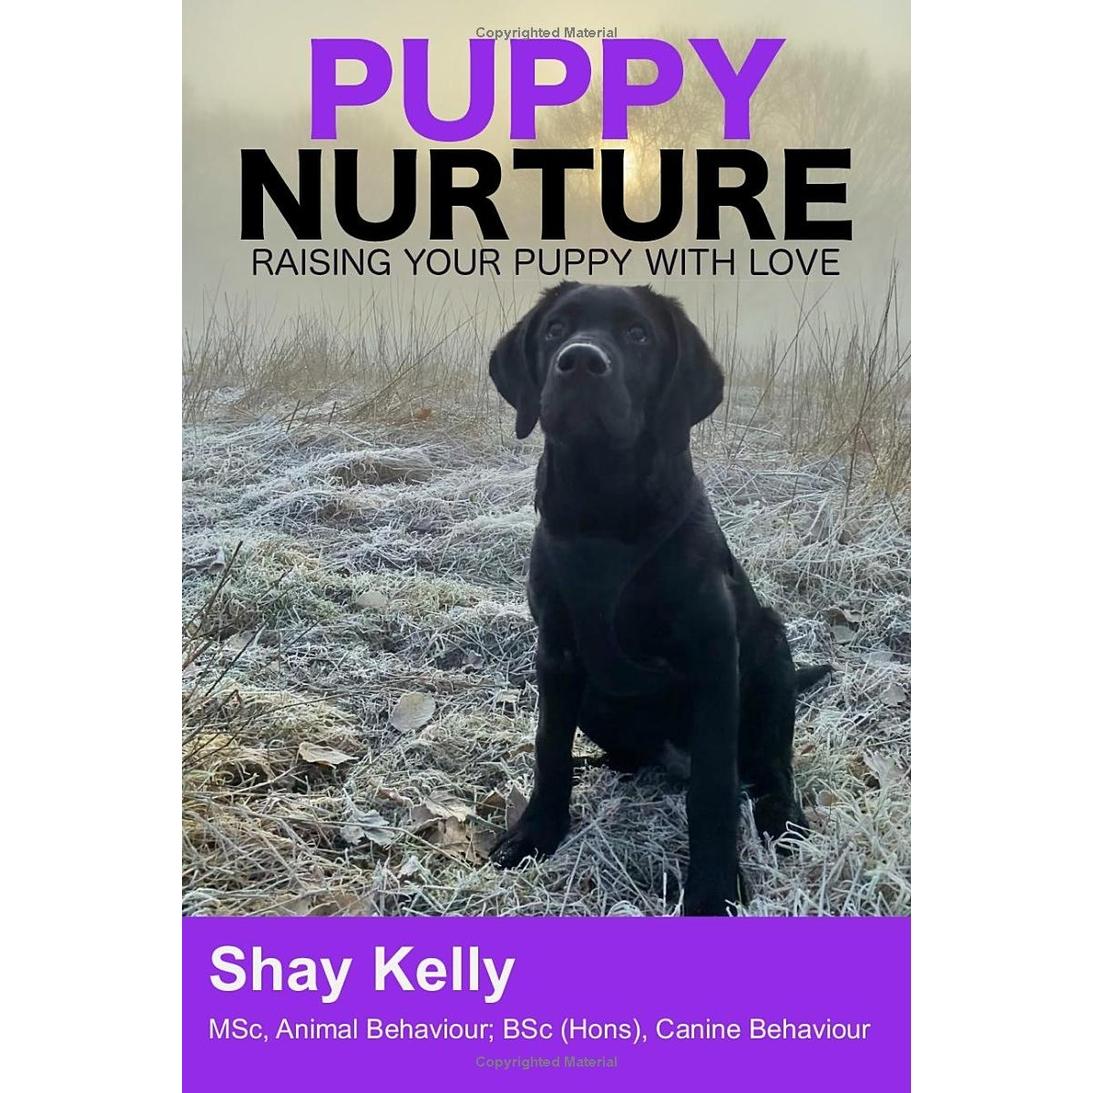 PUPPY NURTURE : RAISING YOUR PUPPY WITH LOVE by Shay Kelly